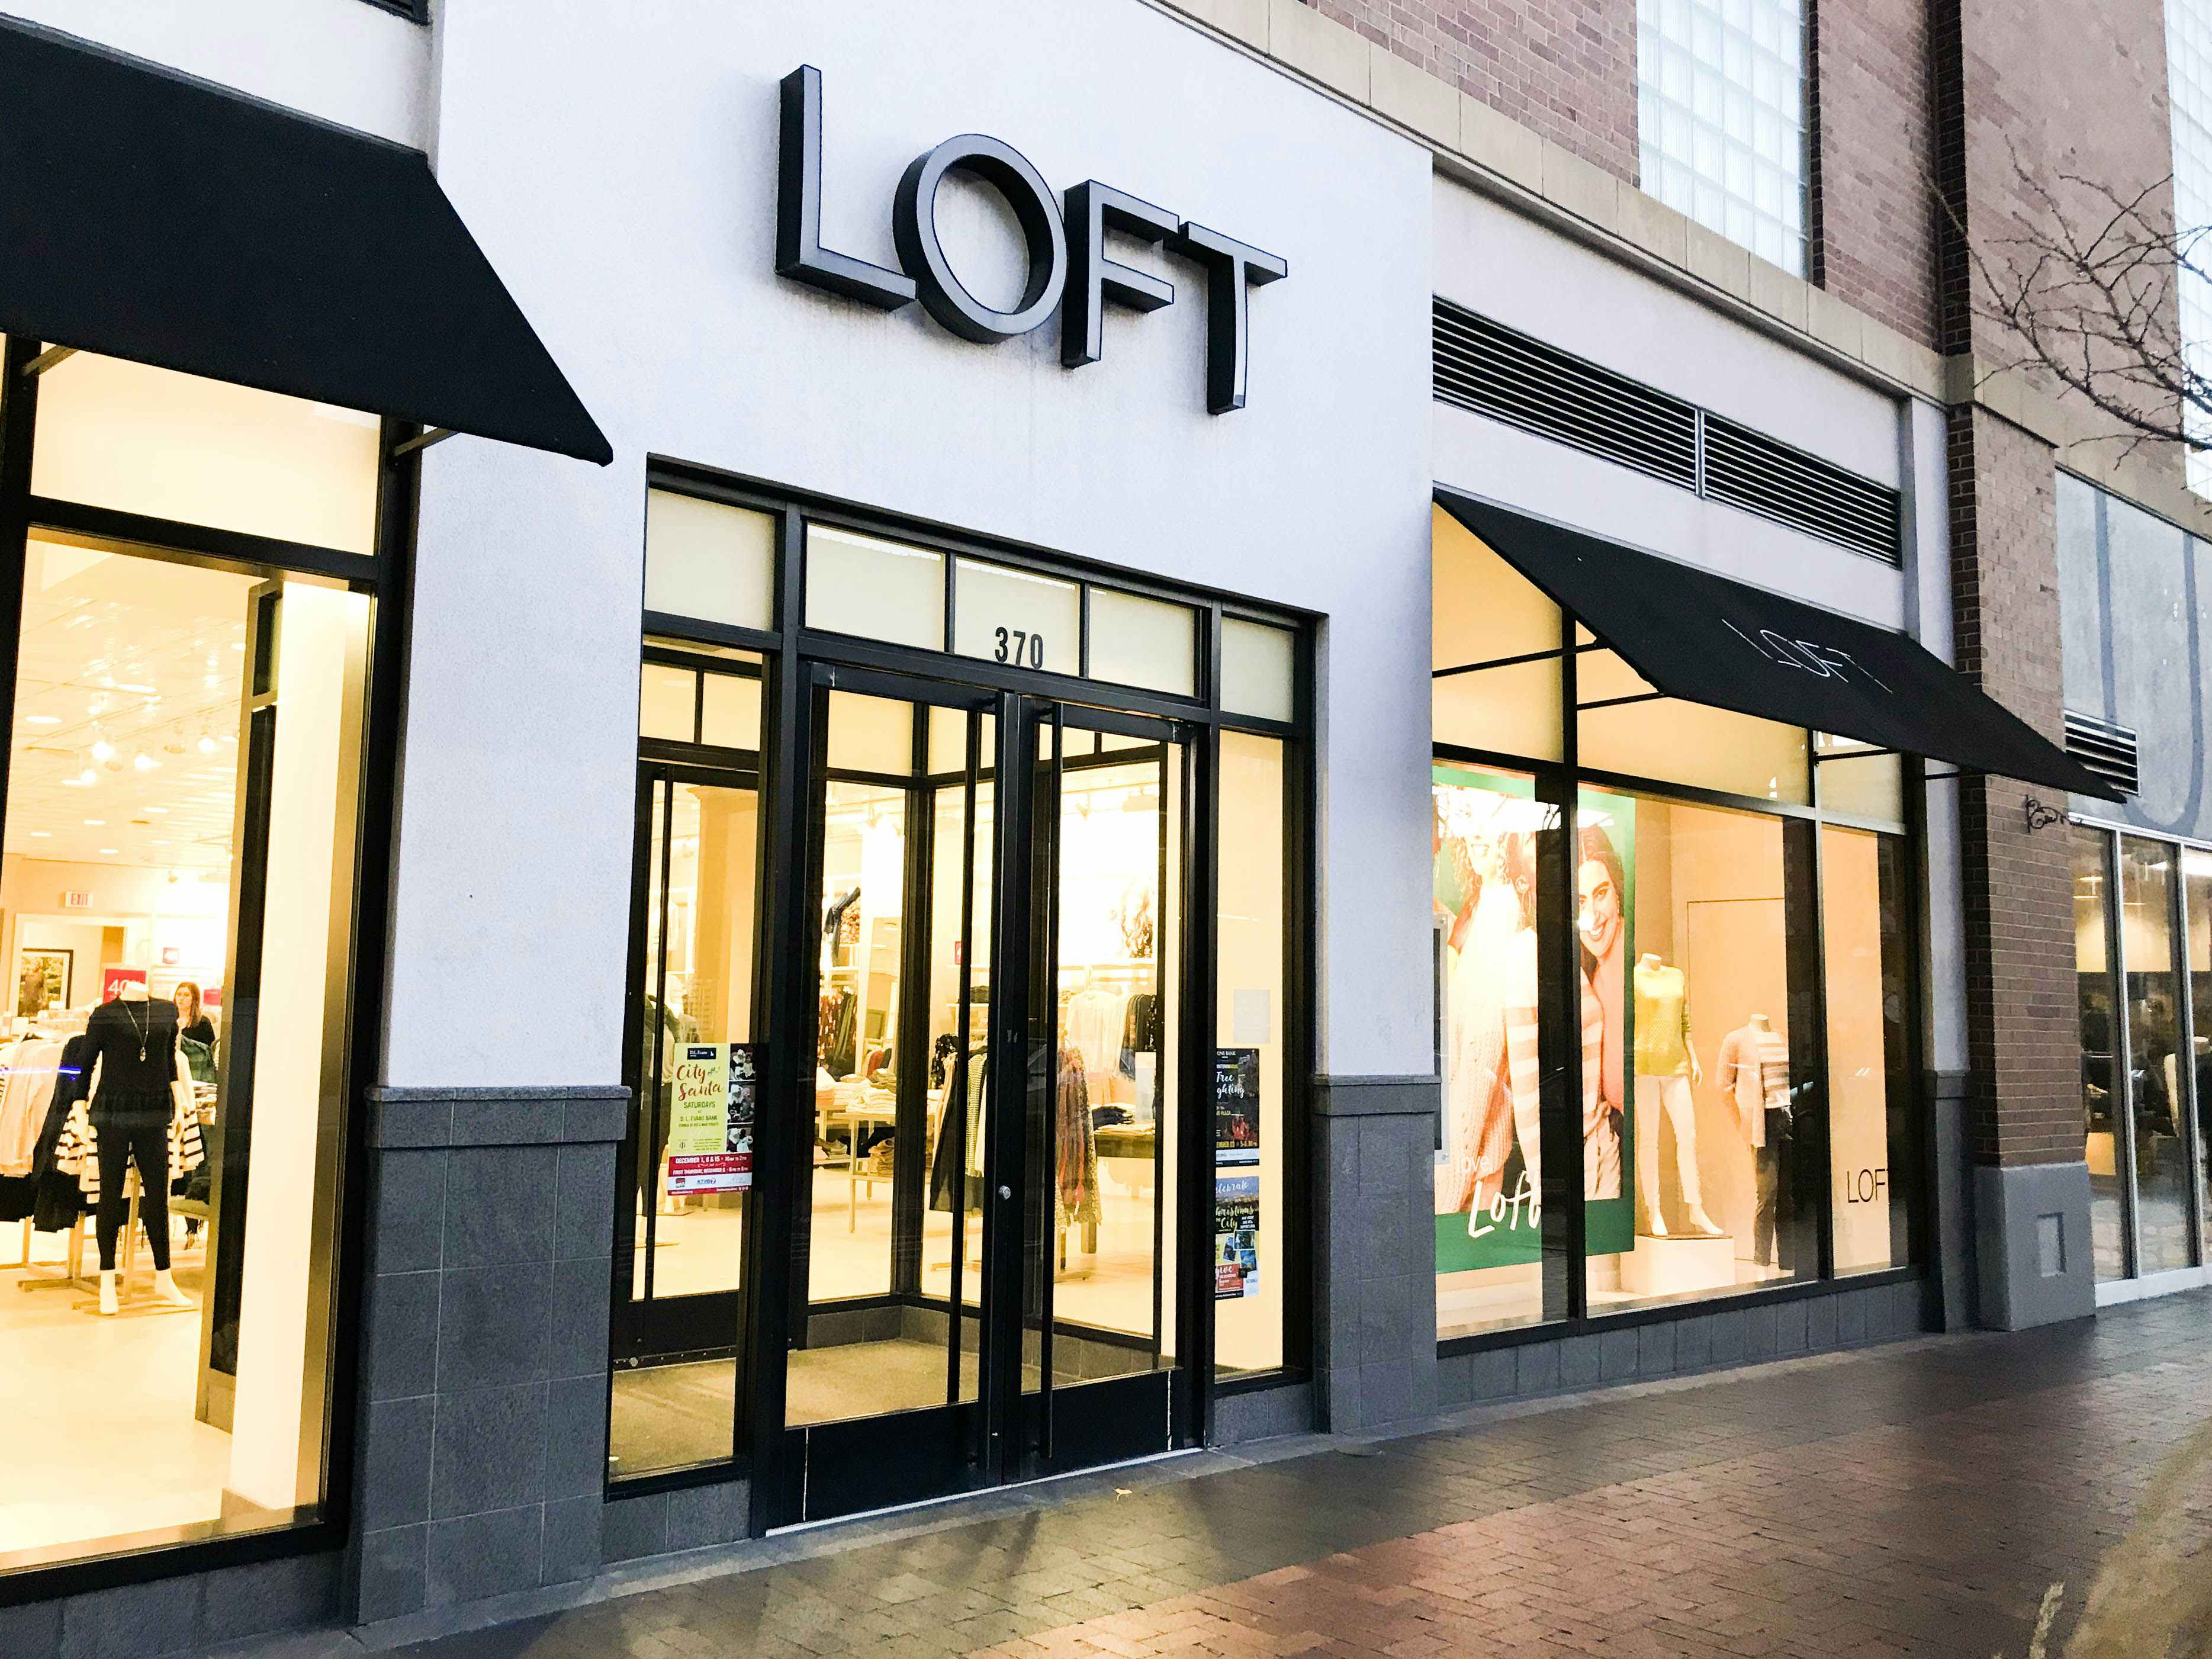 LOFT 50% Off Sale = 15 Items to Make 14 Outfits!